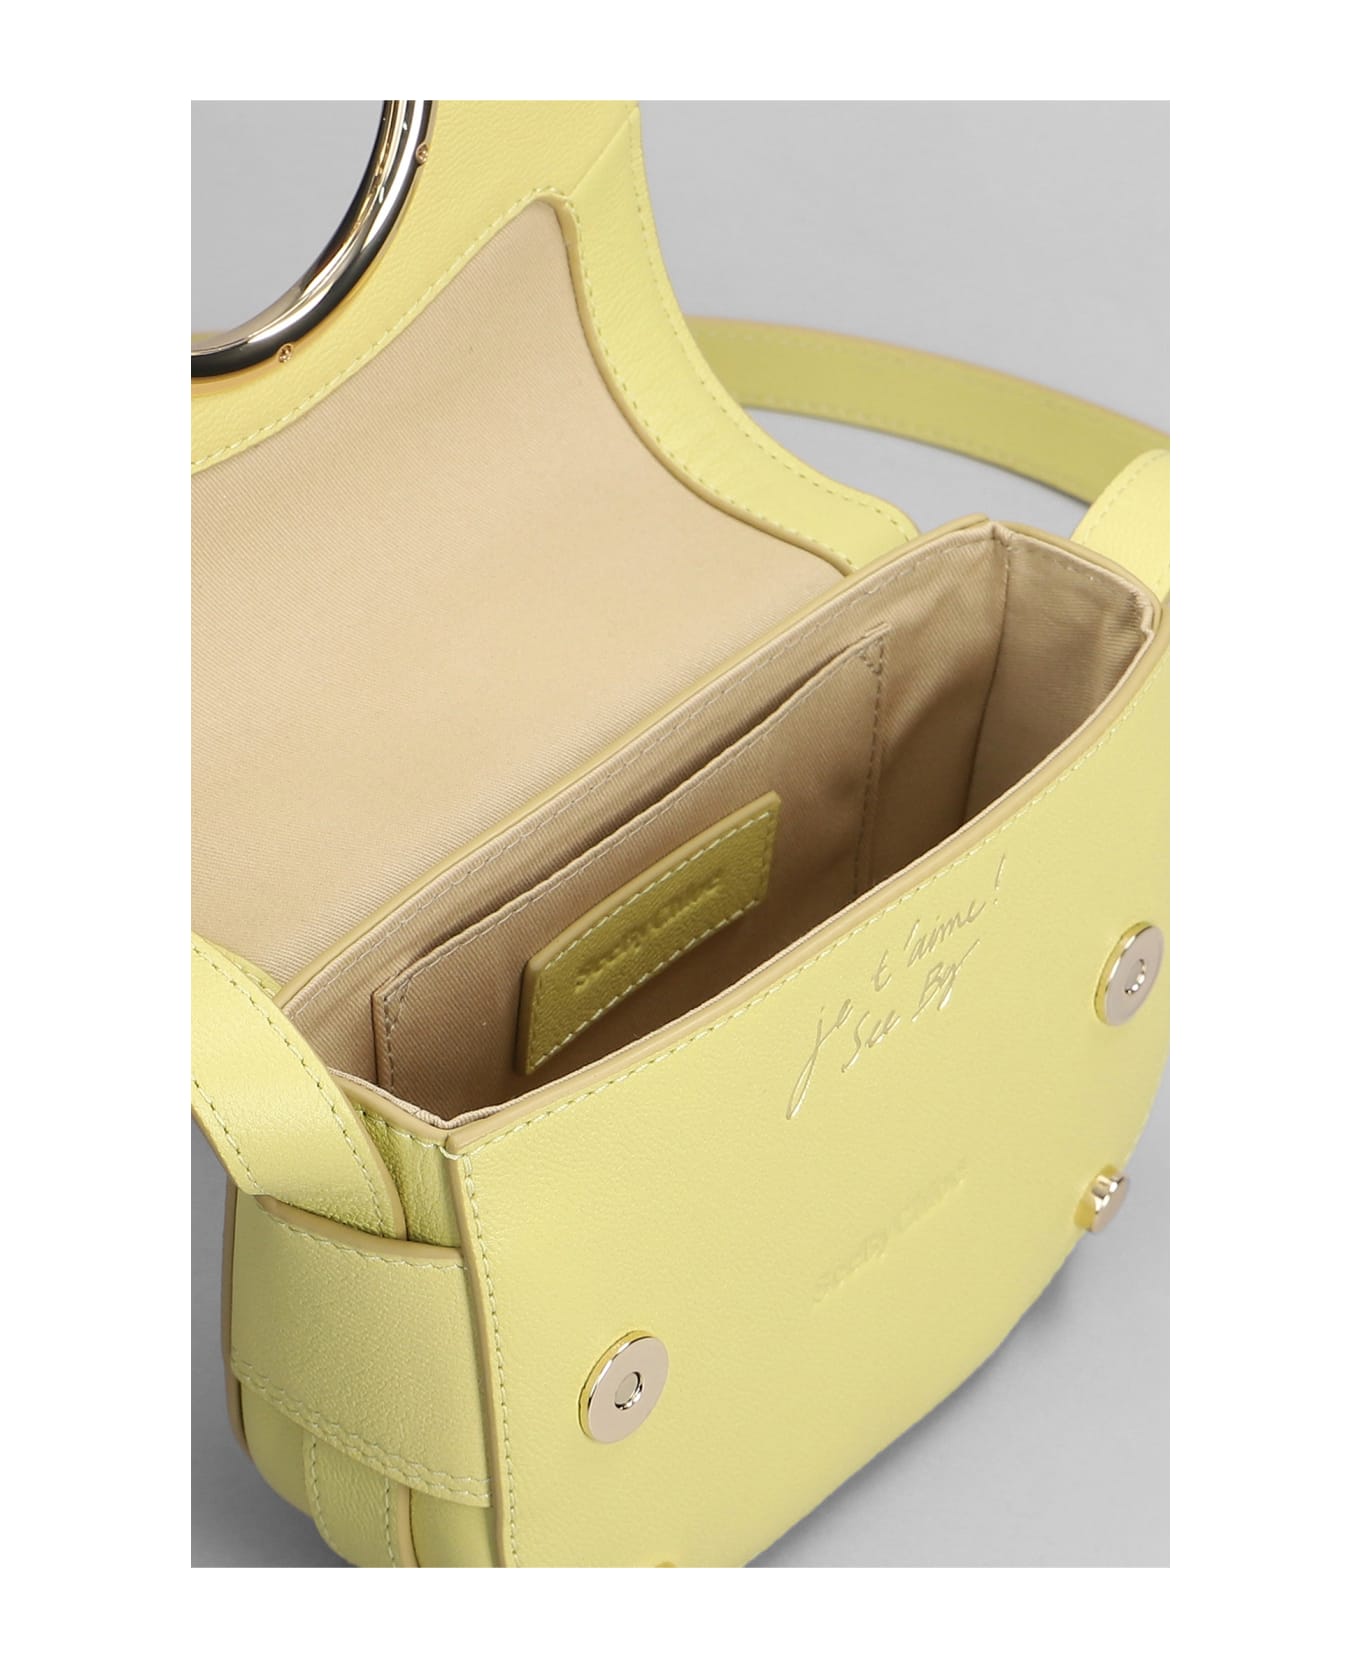 See by Chloé Mara Shoulder Bag In Yellow Leather - yellow